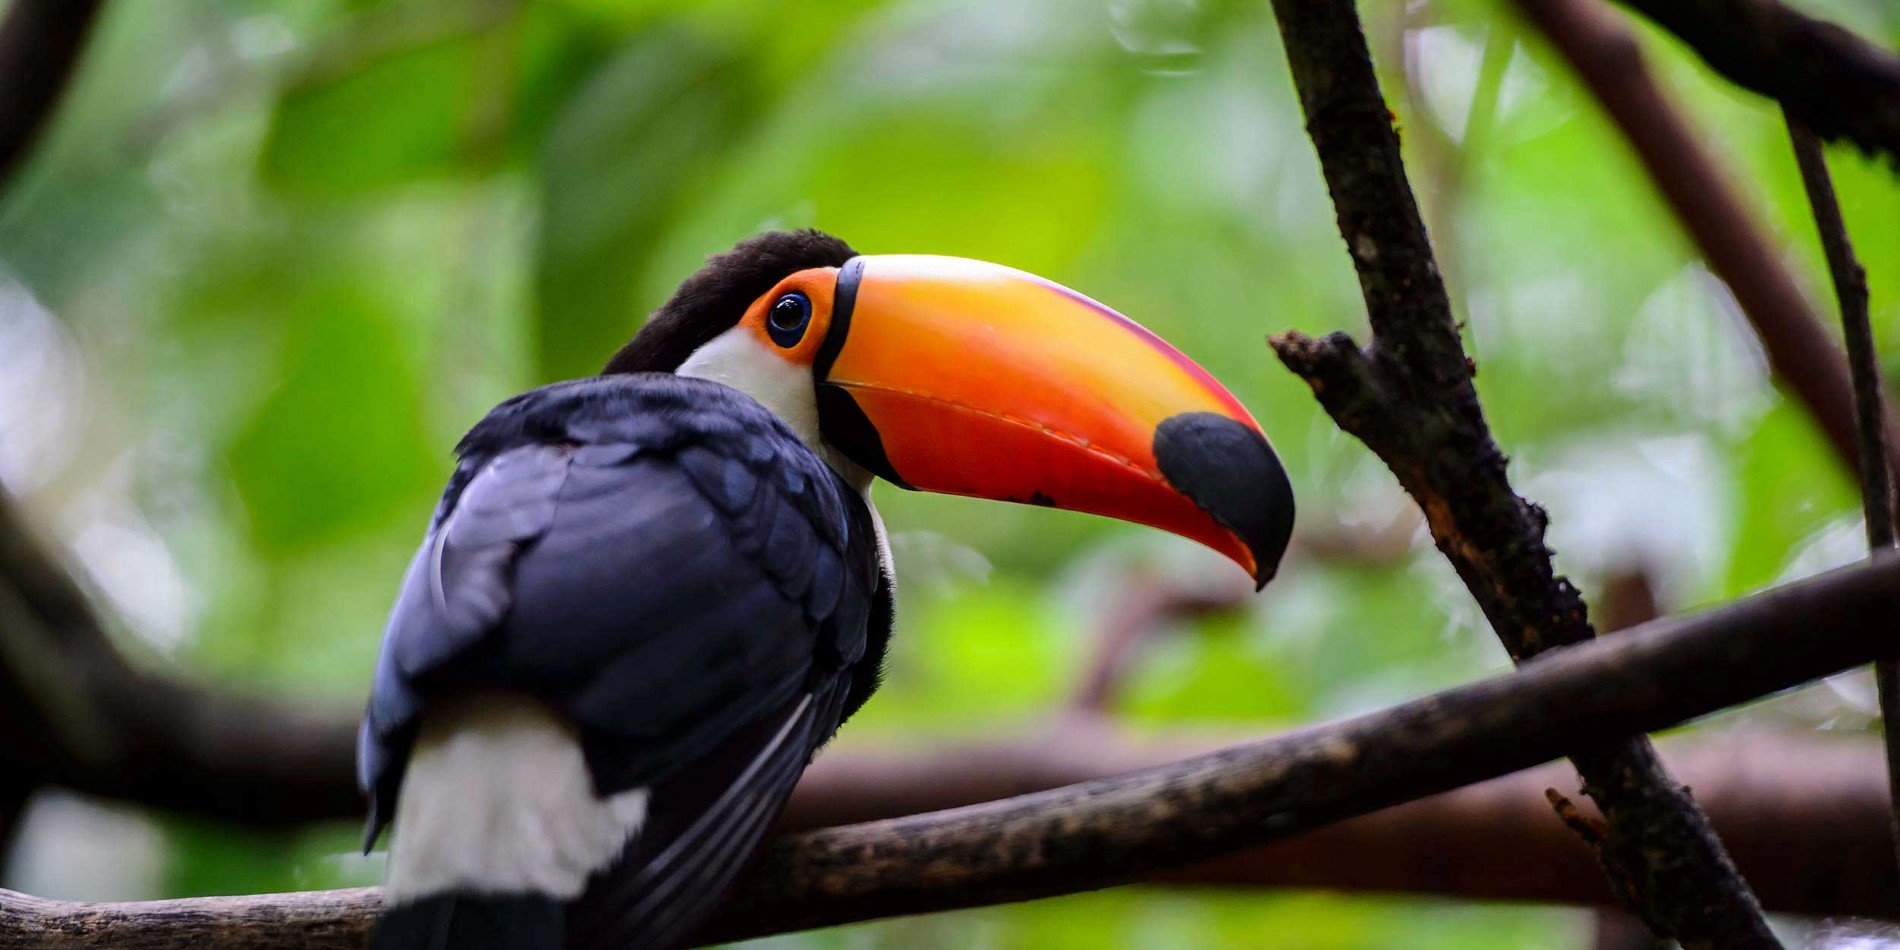 Colourful Toucan sitting on a branch in the Amazonas